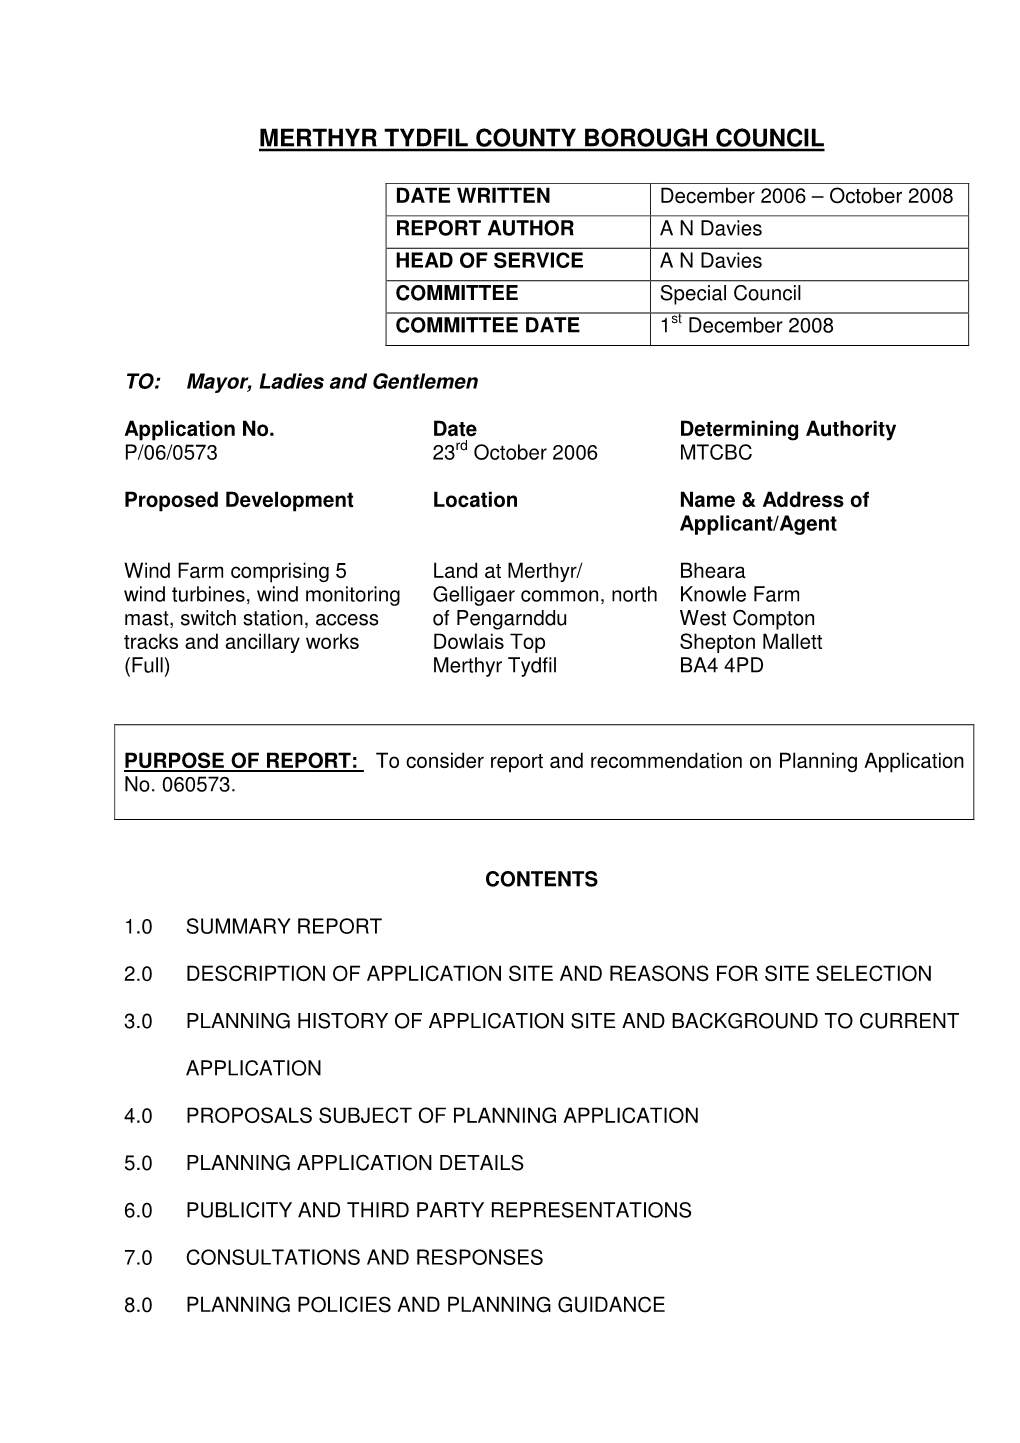 Planning Application Number P/06